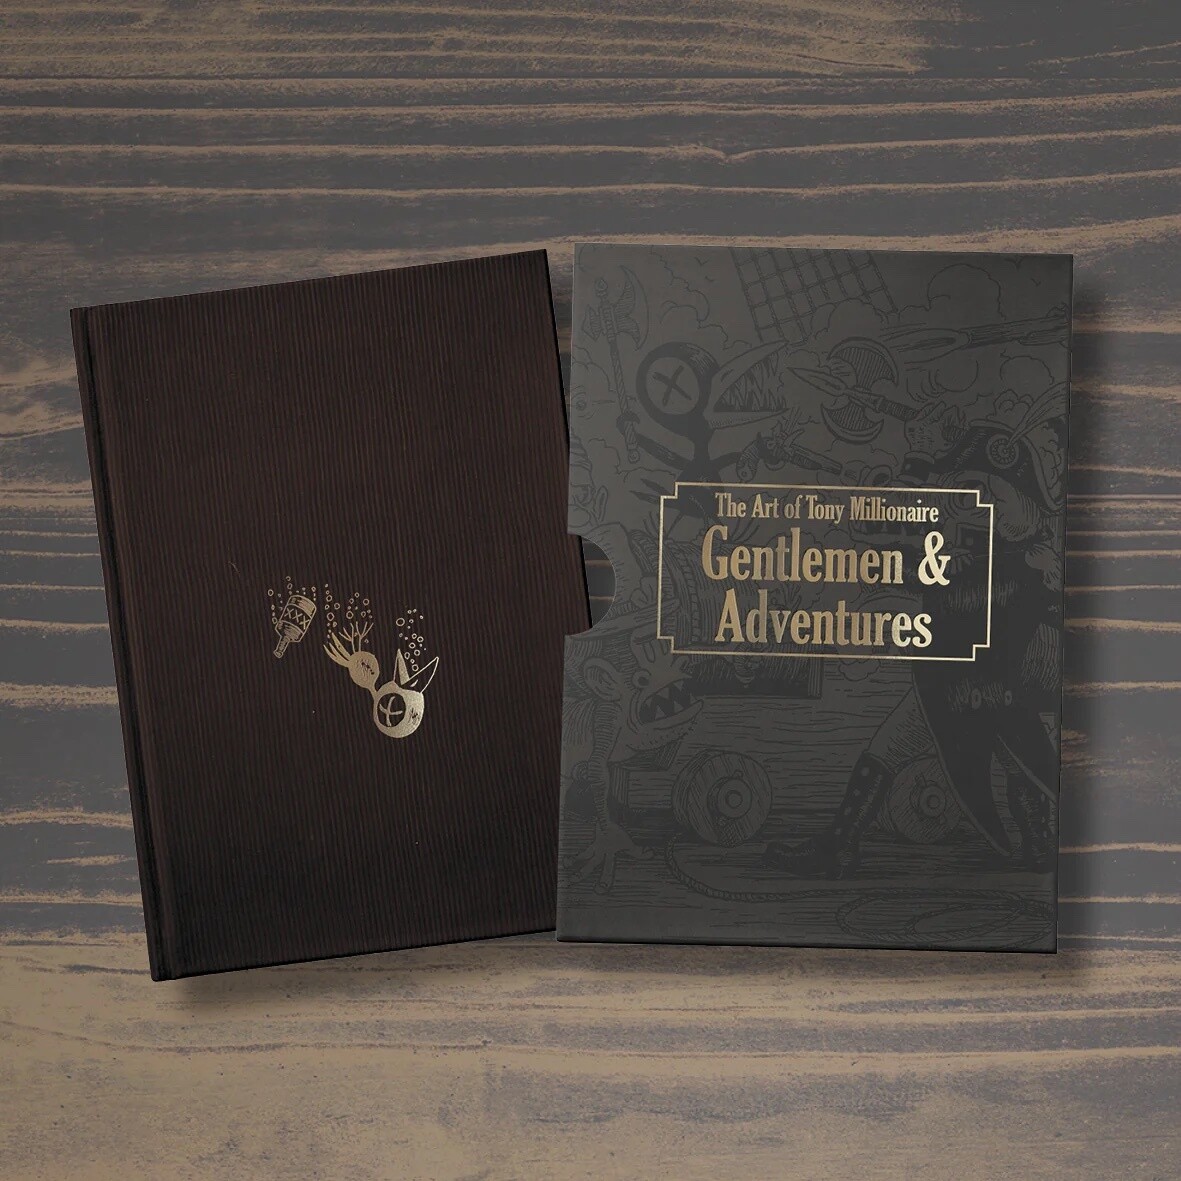 The Art of Tony Millionaire : Gentlemen & Adventures (Limited Edition) - The Mansion Press